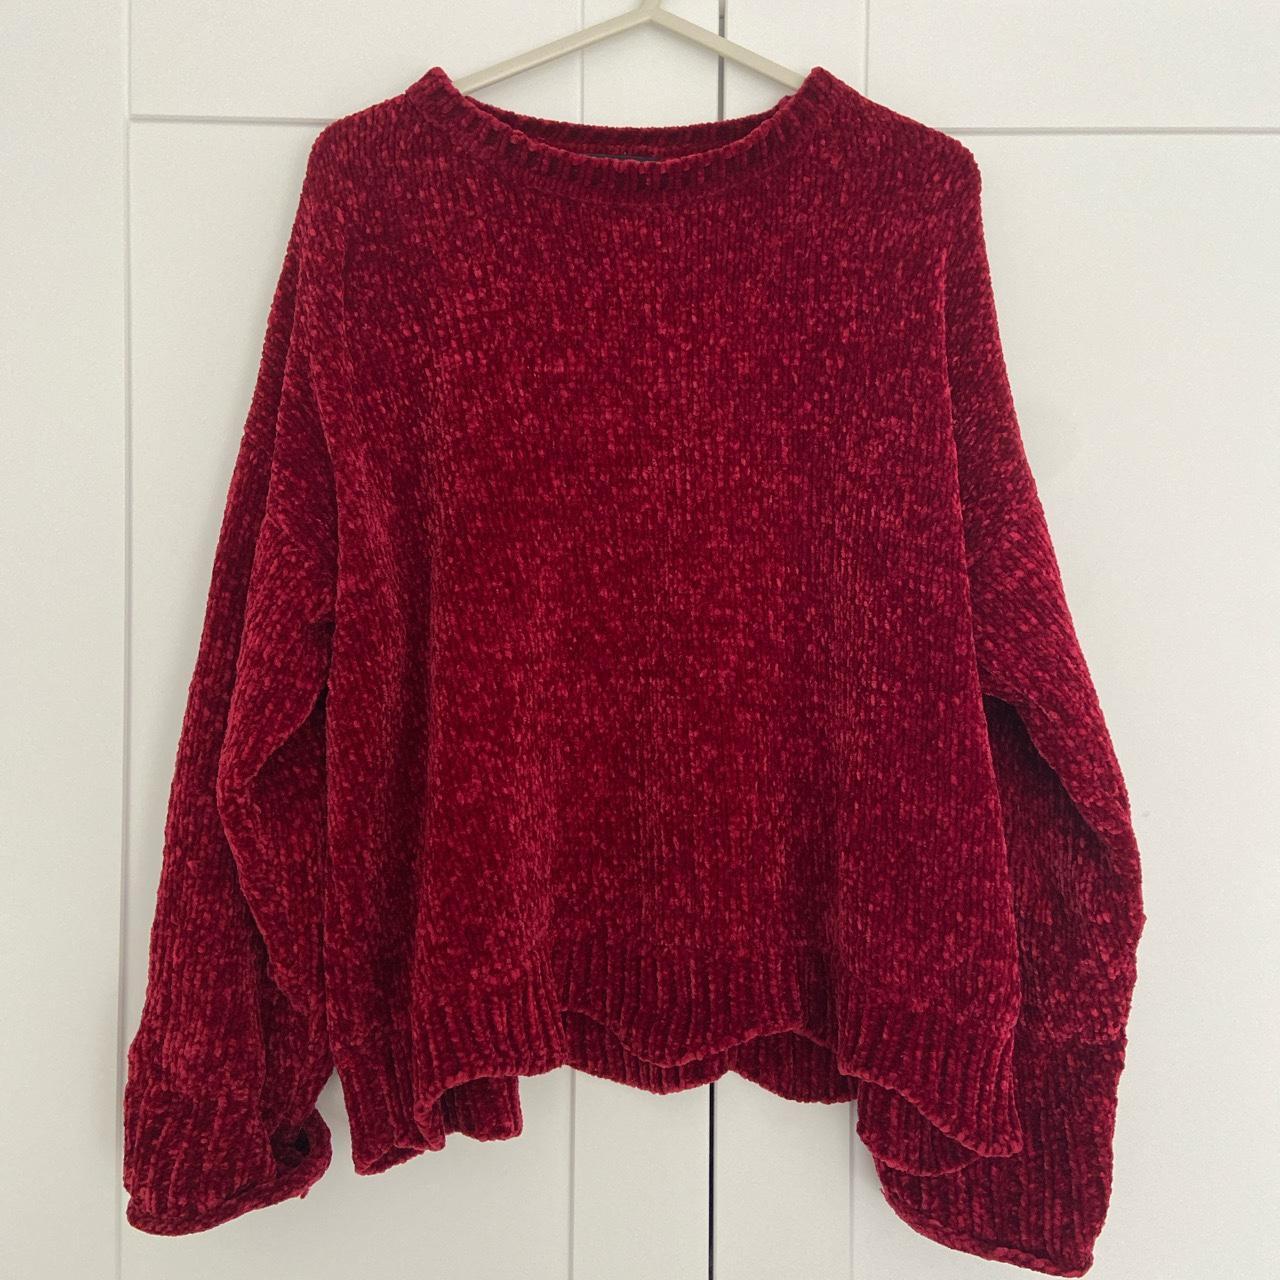 Gorgeous red Zara chenille knit sweater jumper with... - Depop